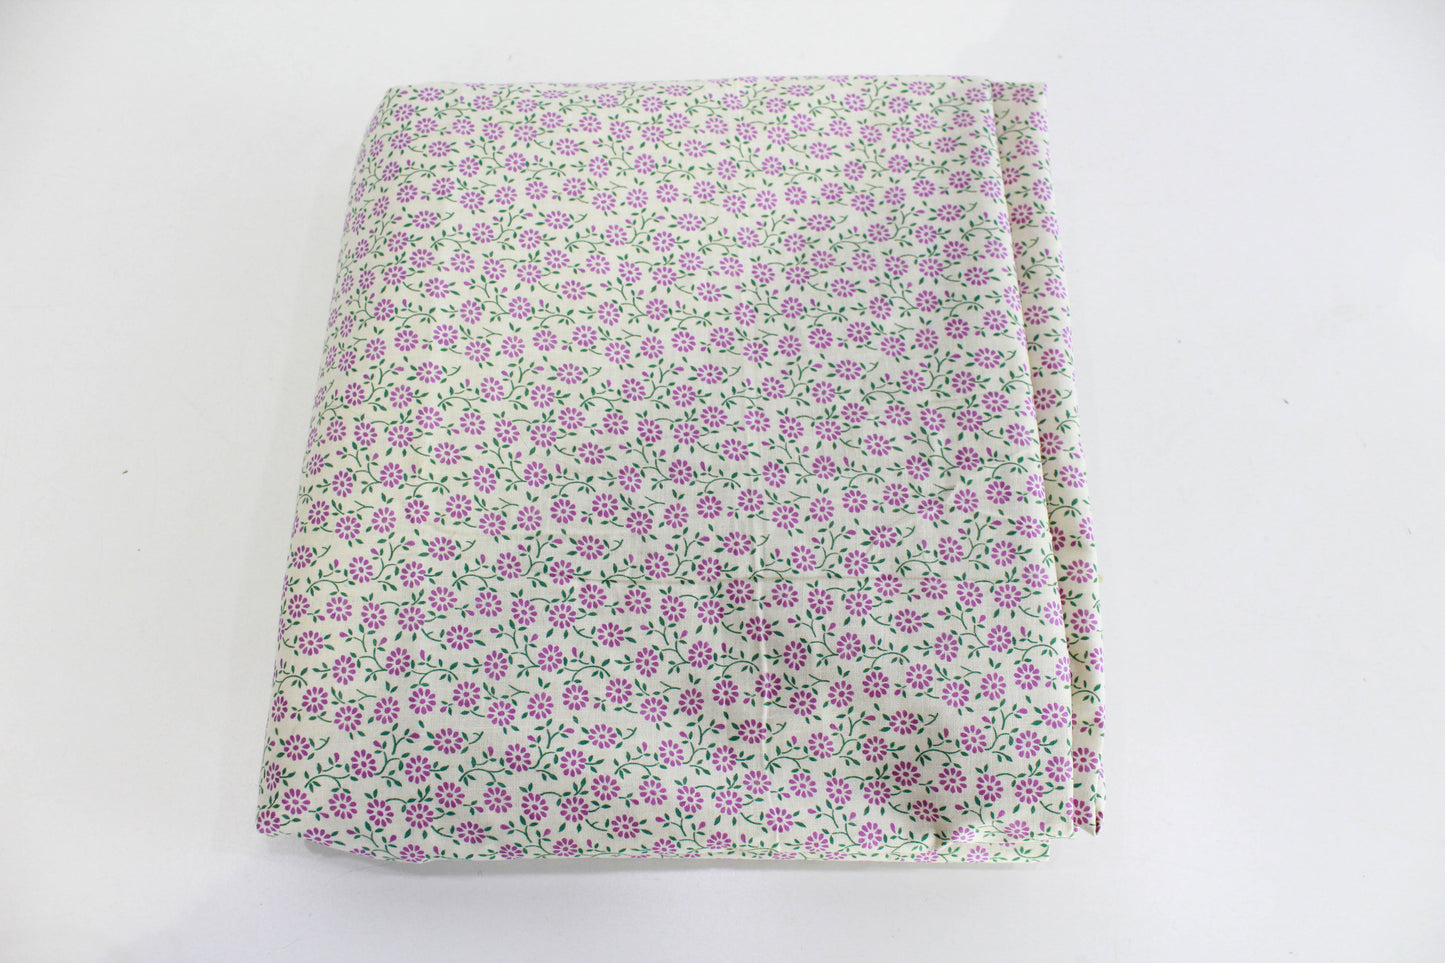 1950s lilac floral print cotton fabric dainty floral vintage sewing fabric